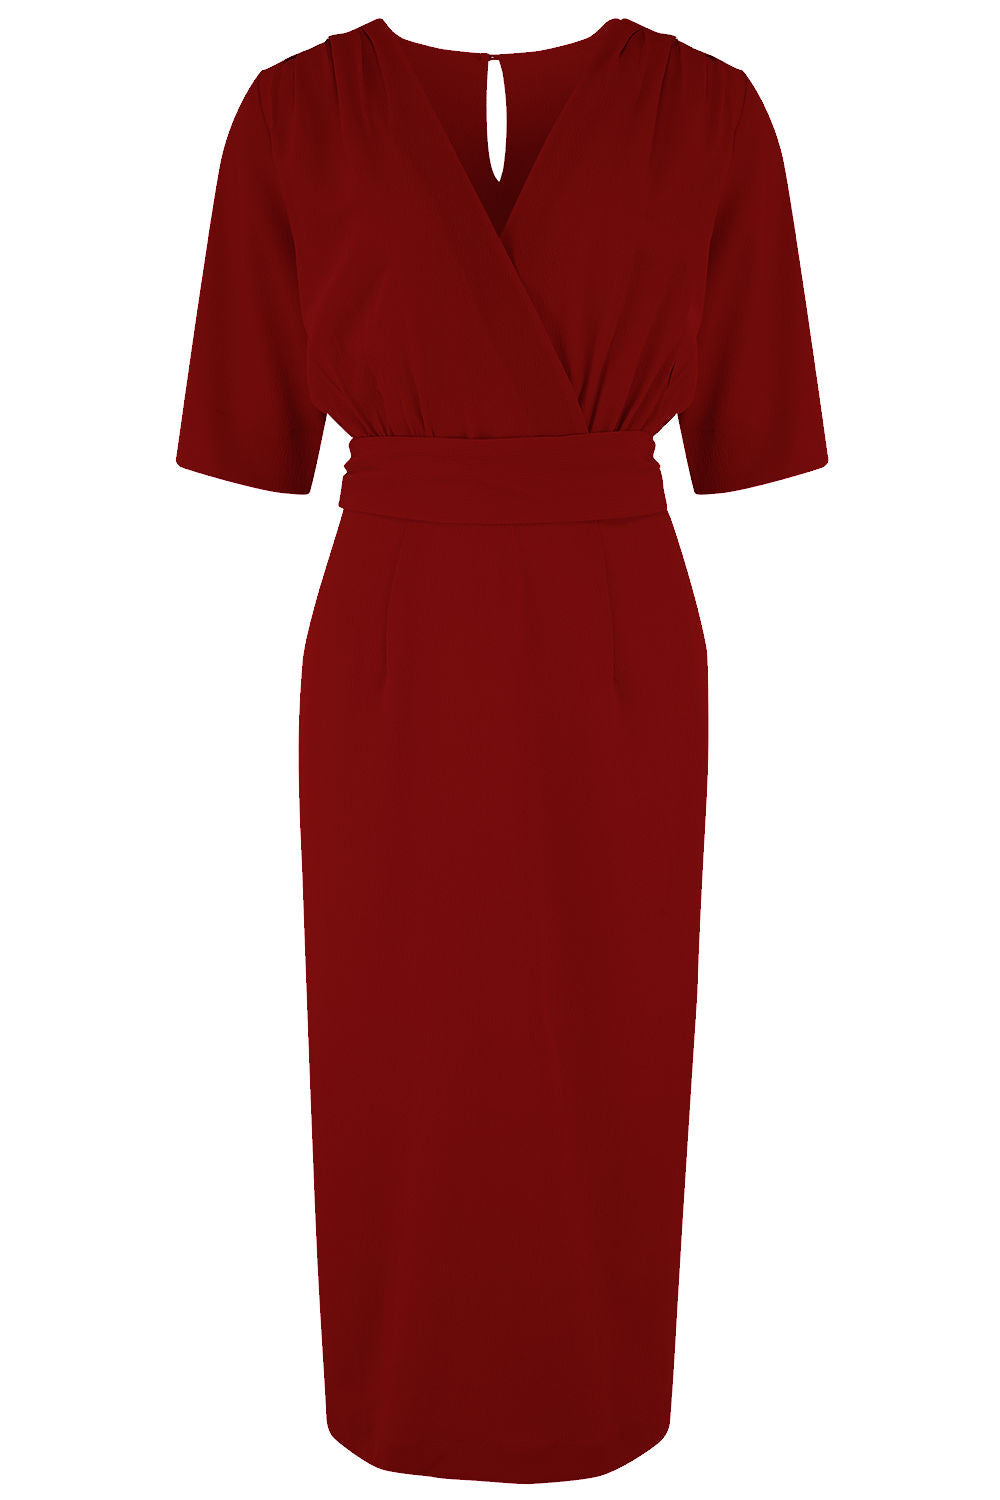 The “Evelyn" Wiggle Dress in Wine, True Late 40s Early 50s Vintage Style product